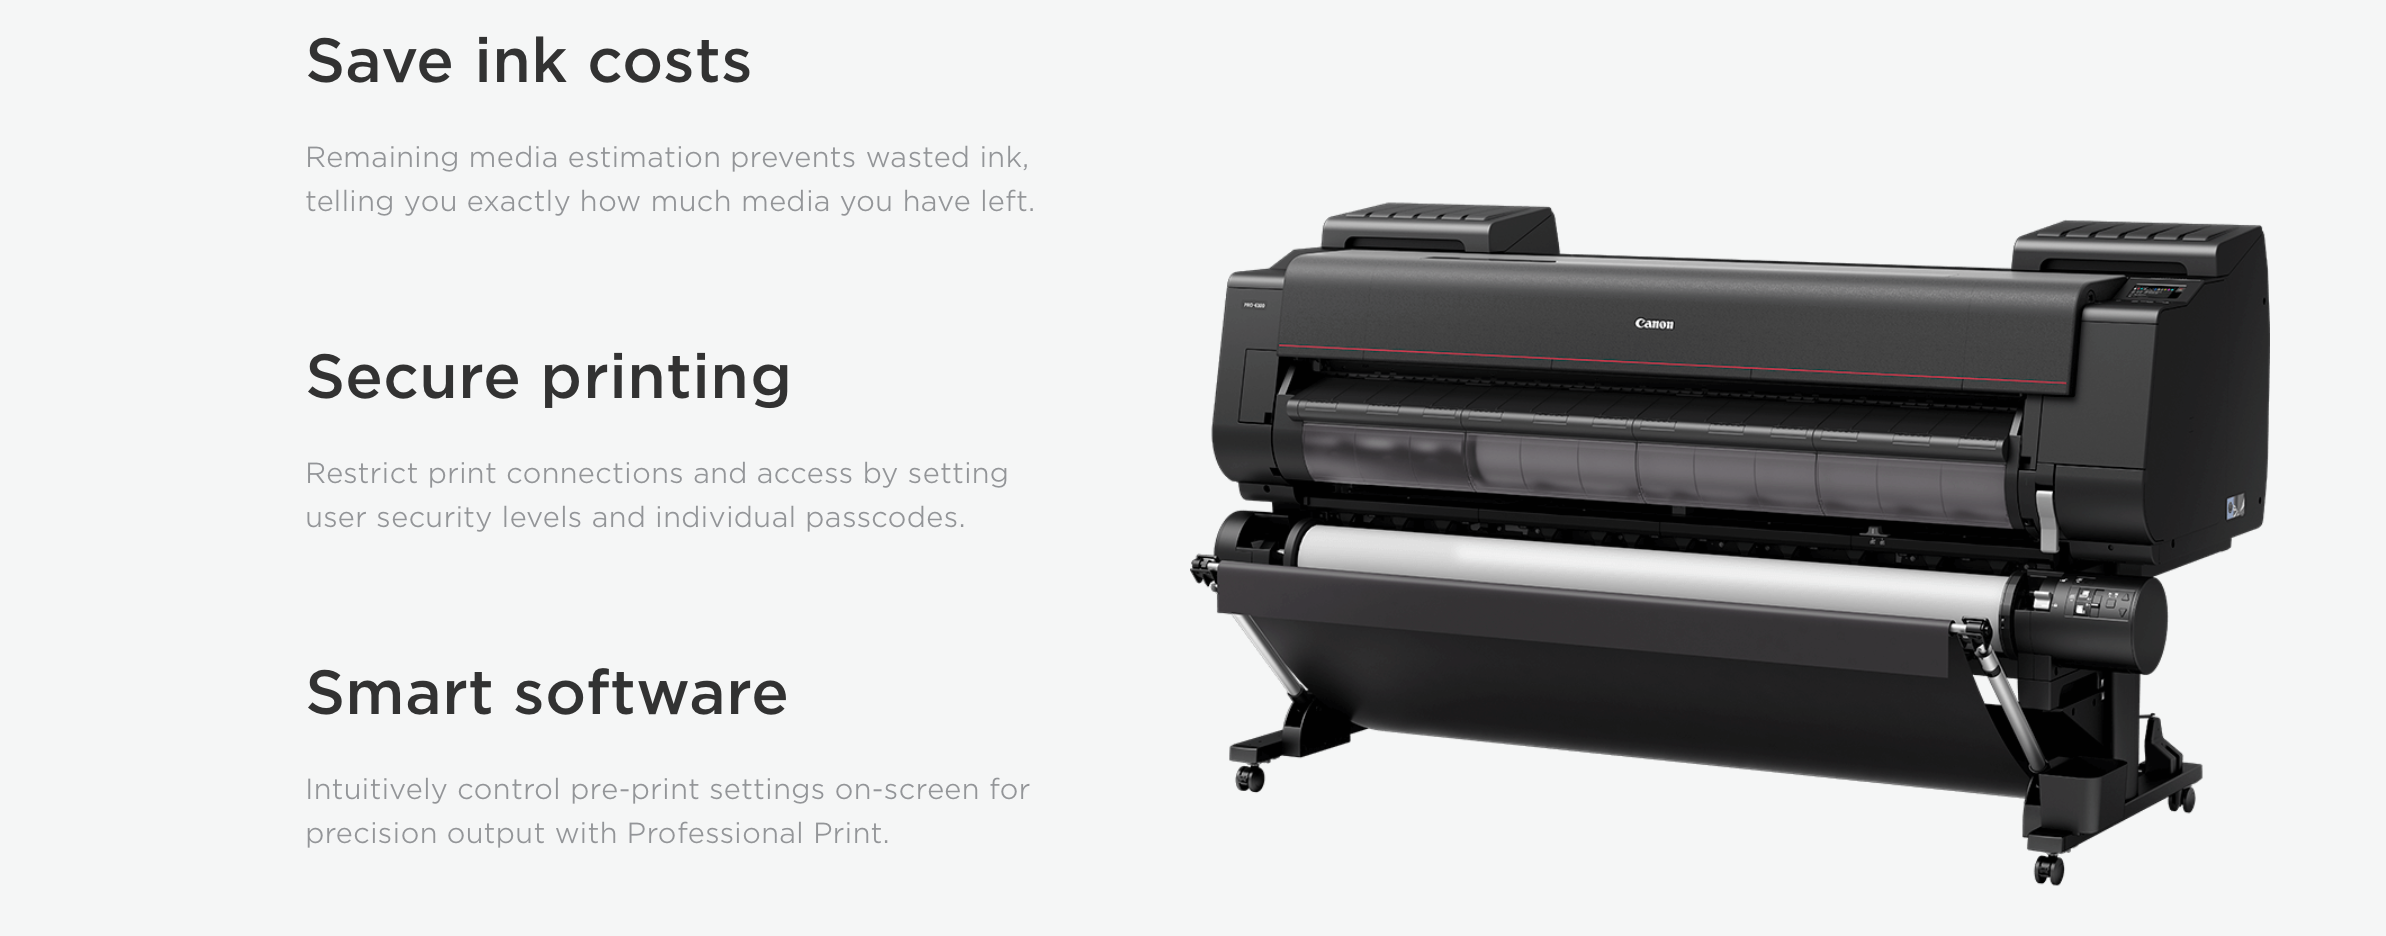 CANON PRO-6100 save ink costs